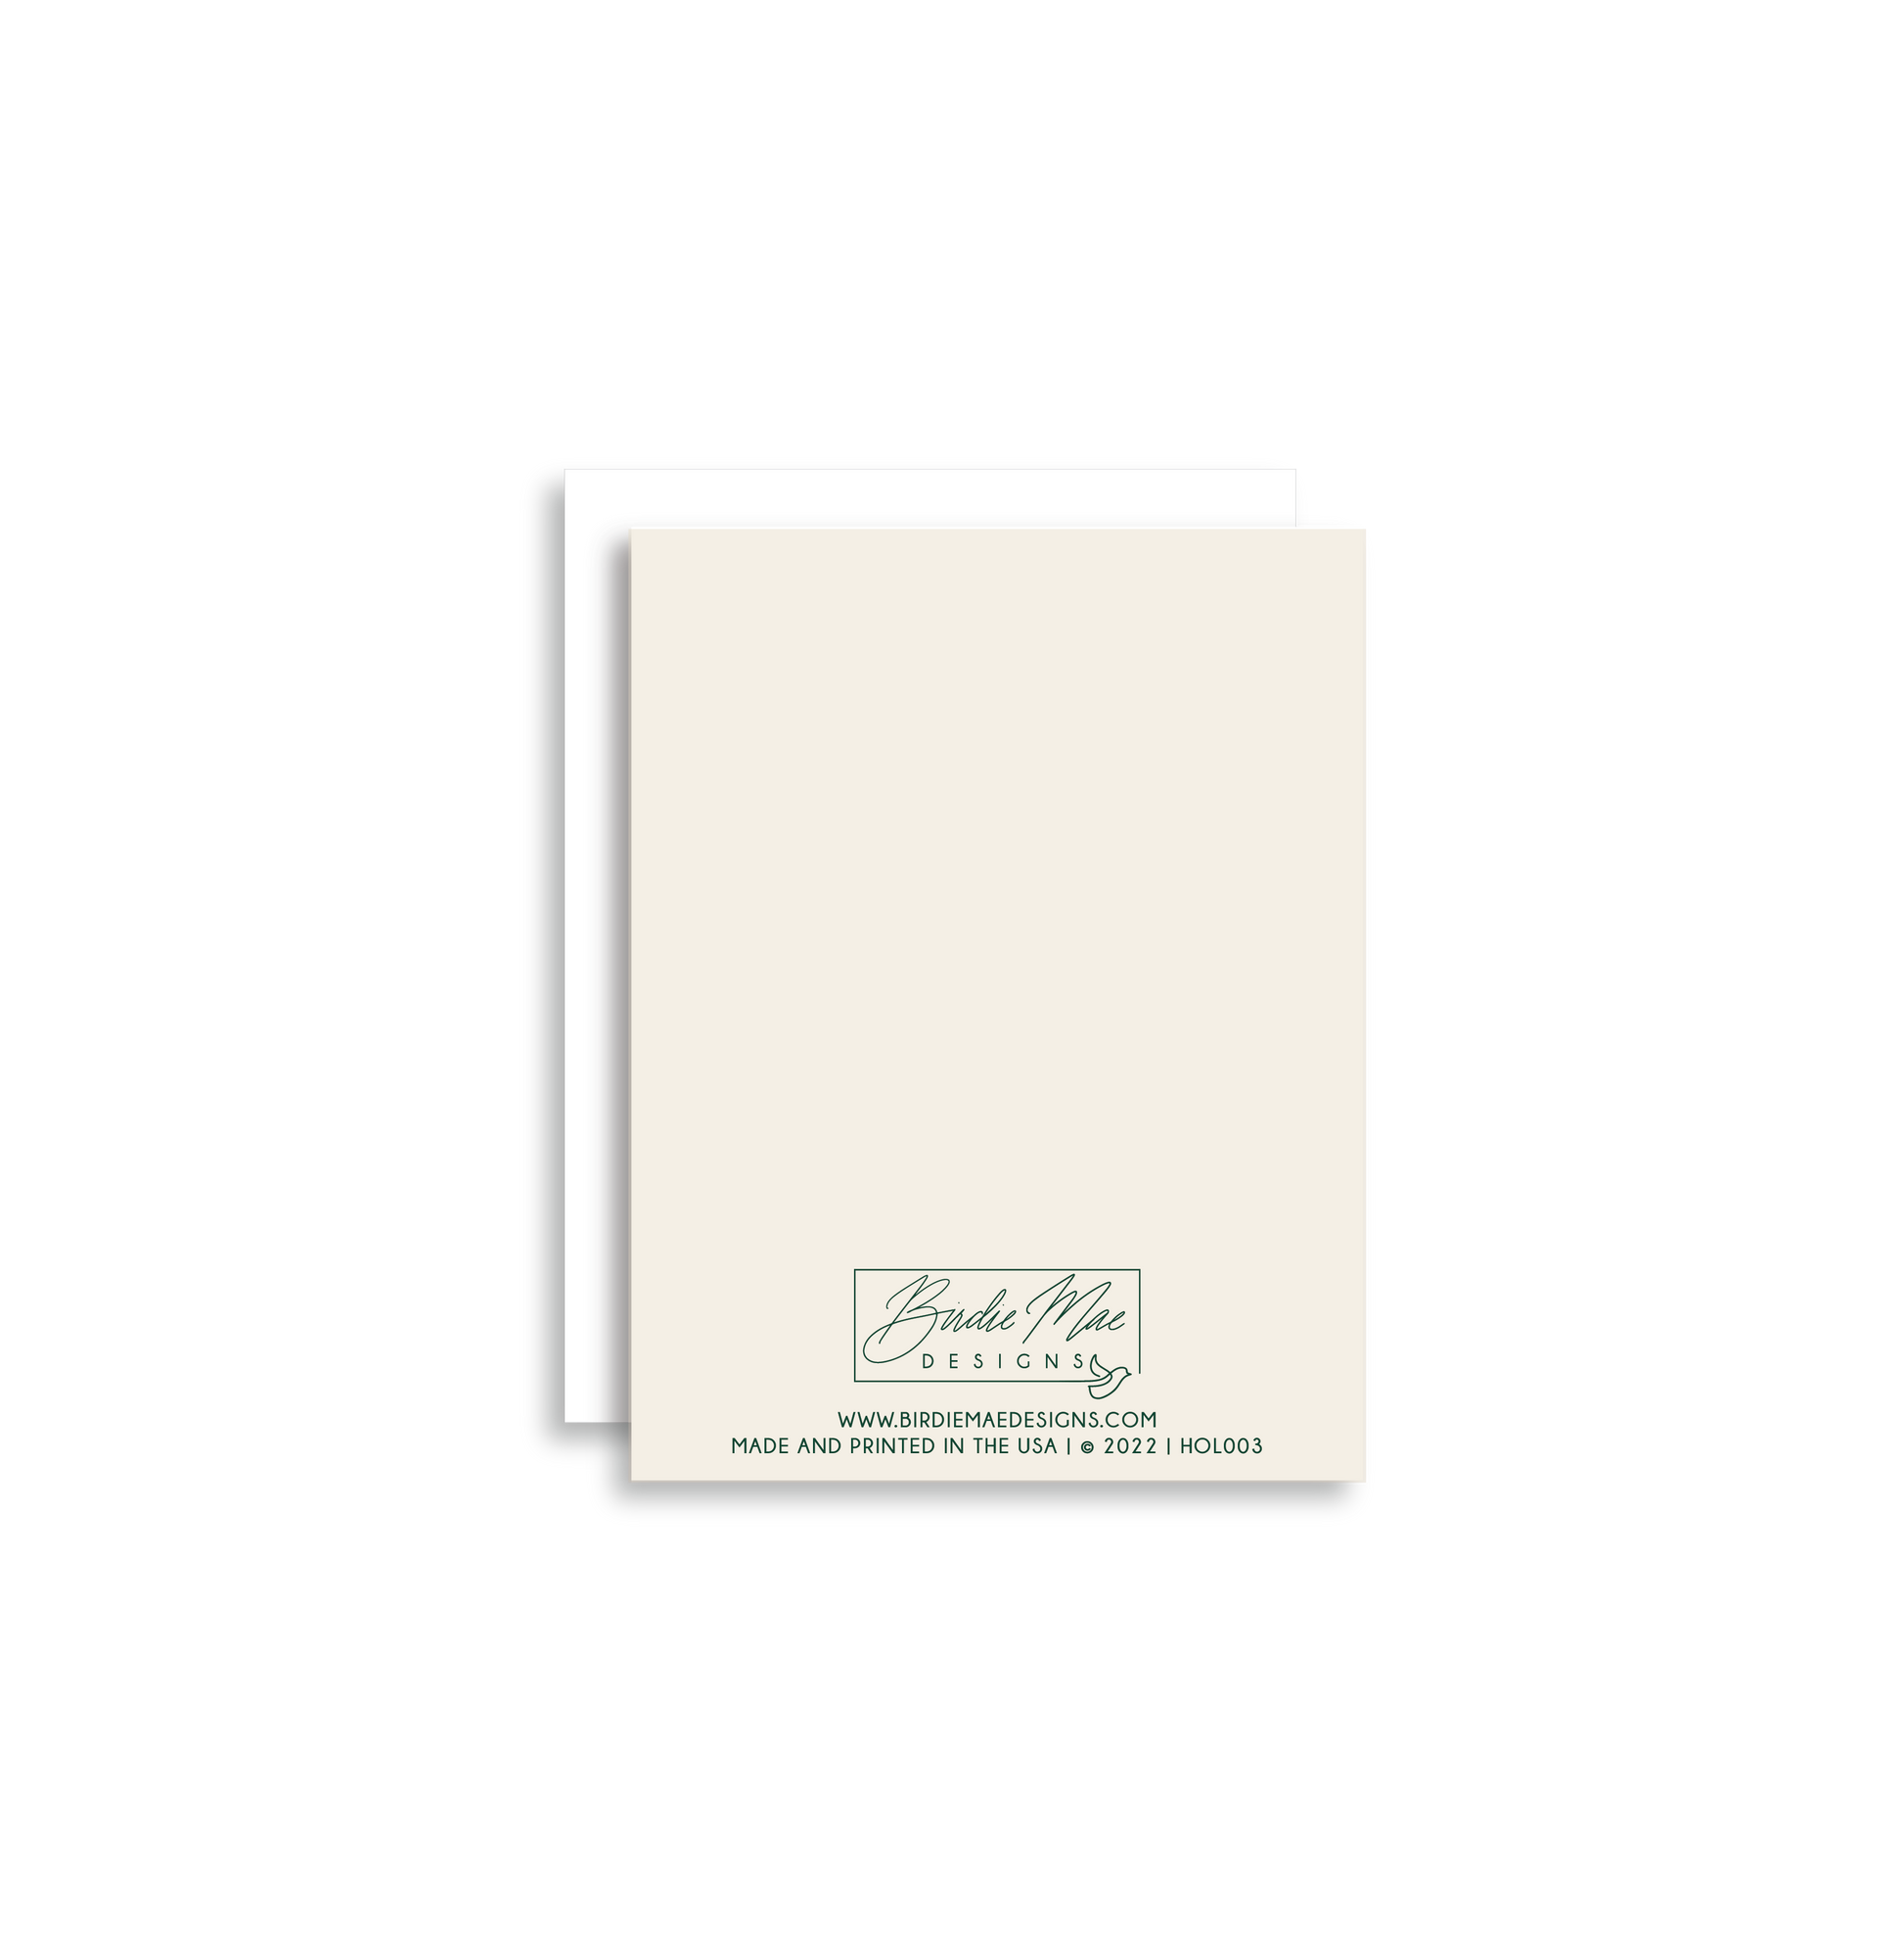 "Glory to the Newborn King!" Christmas Greeting Card is a festive way to bring joy during the holiday season. Each card is folded to 4.25" tall by 5.5" wide, is blank inside and comes with a matching white envelope. Cards are packaged in cellophane sleeves.